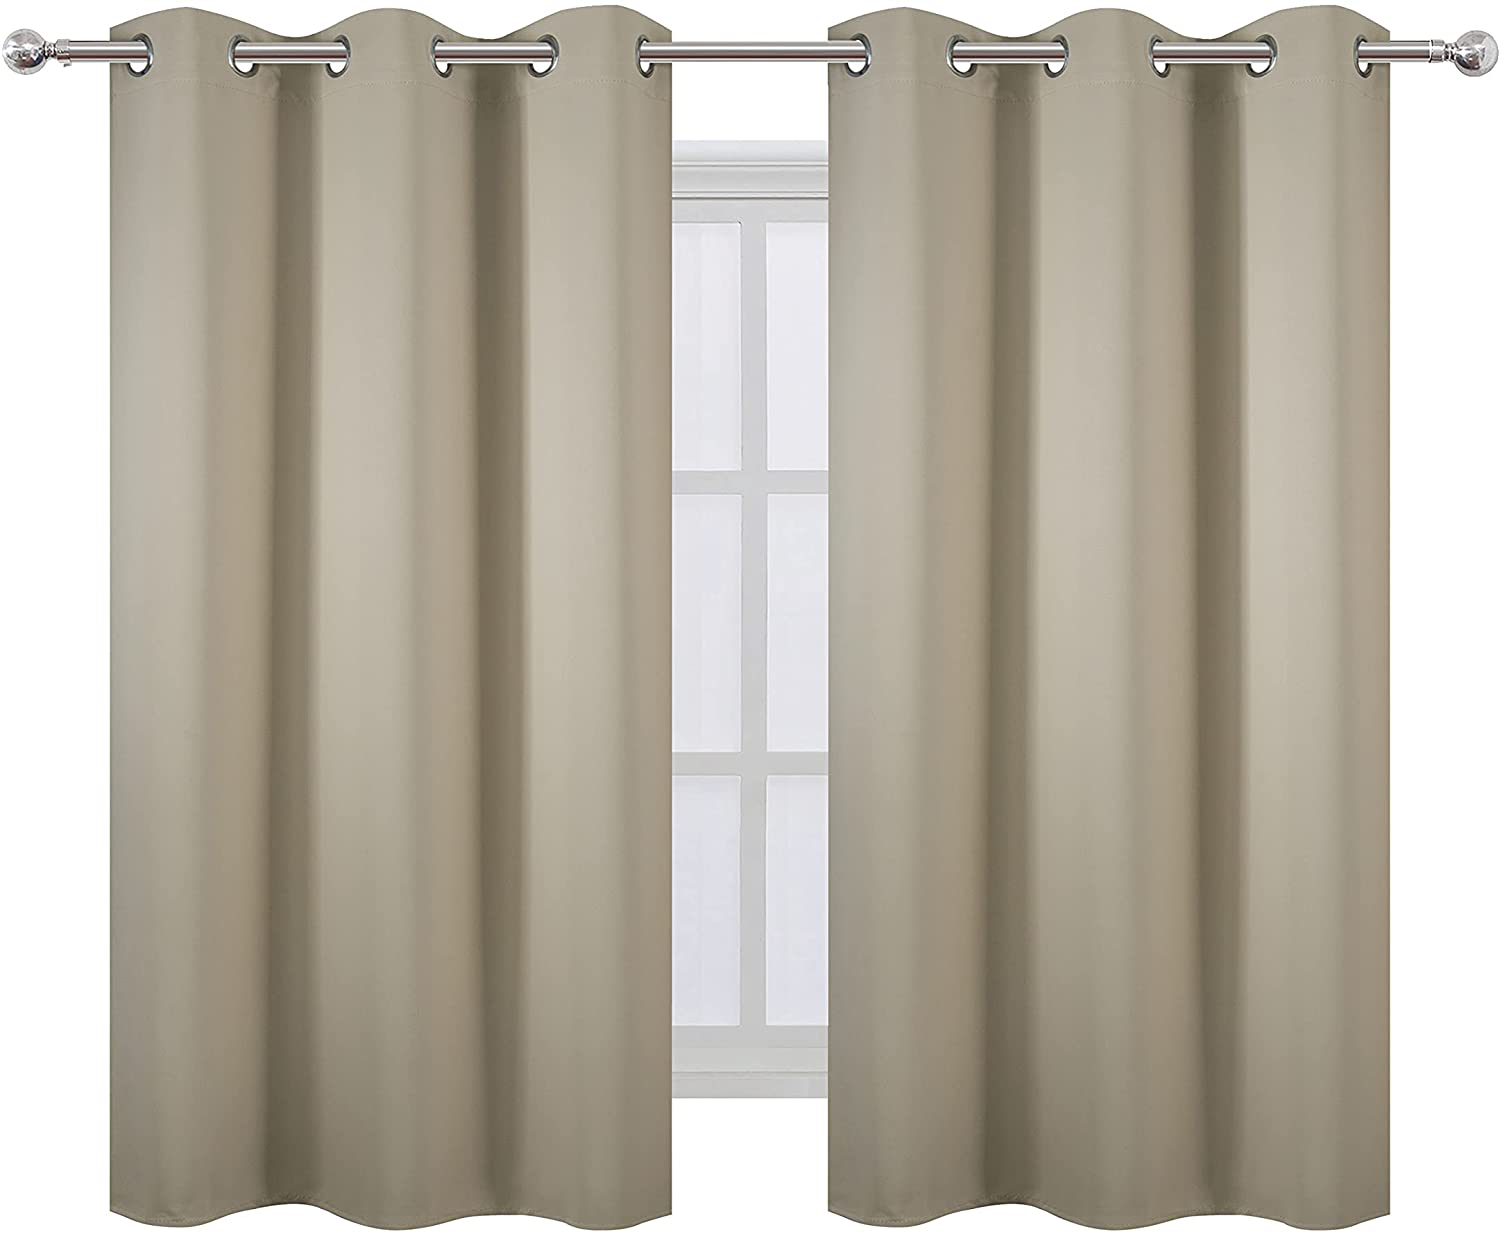 LEMOMO Sea Teal Thermal Blackout Curtains/38 x 63 Inch/Set of 2 Panels Room Darkening Curtains for Bedroom